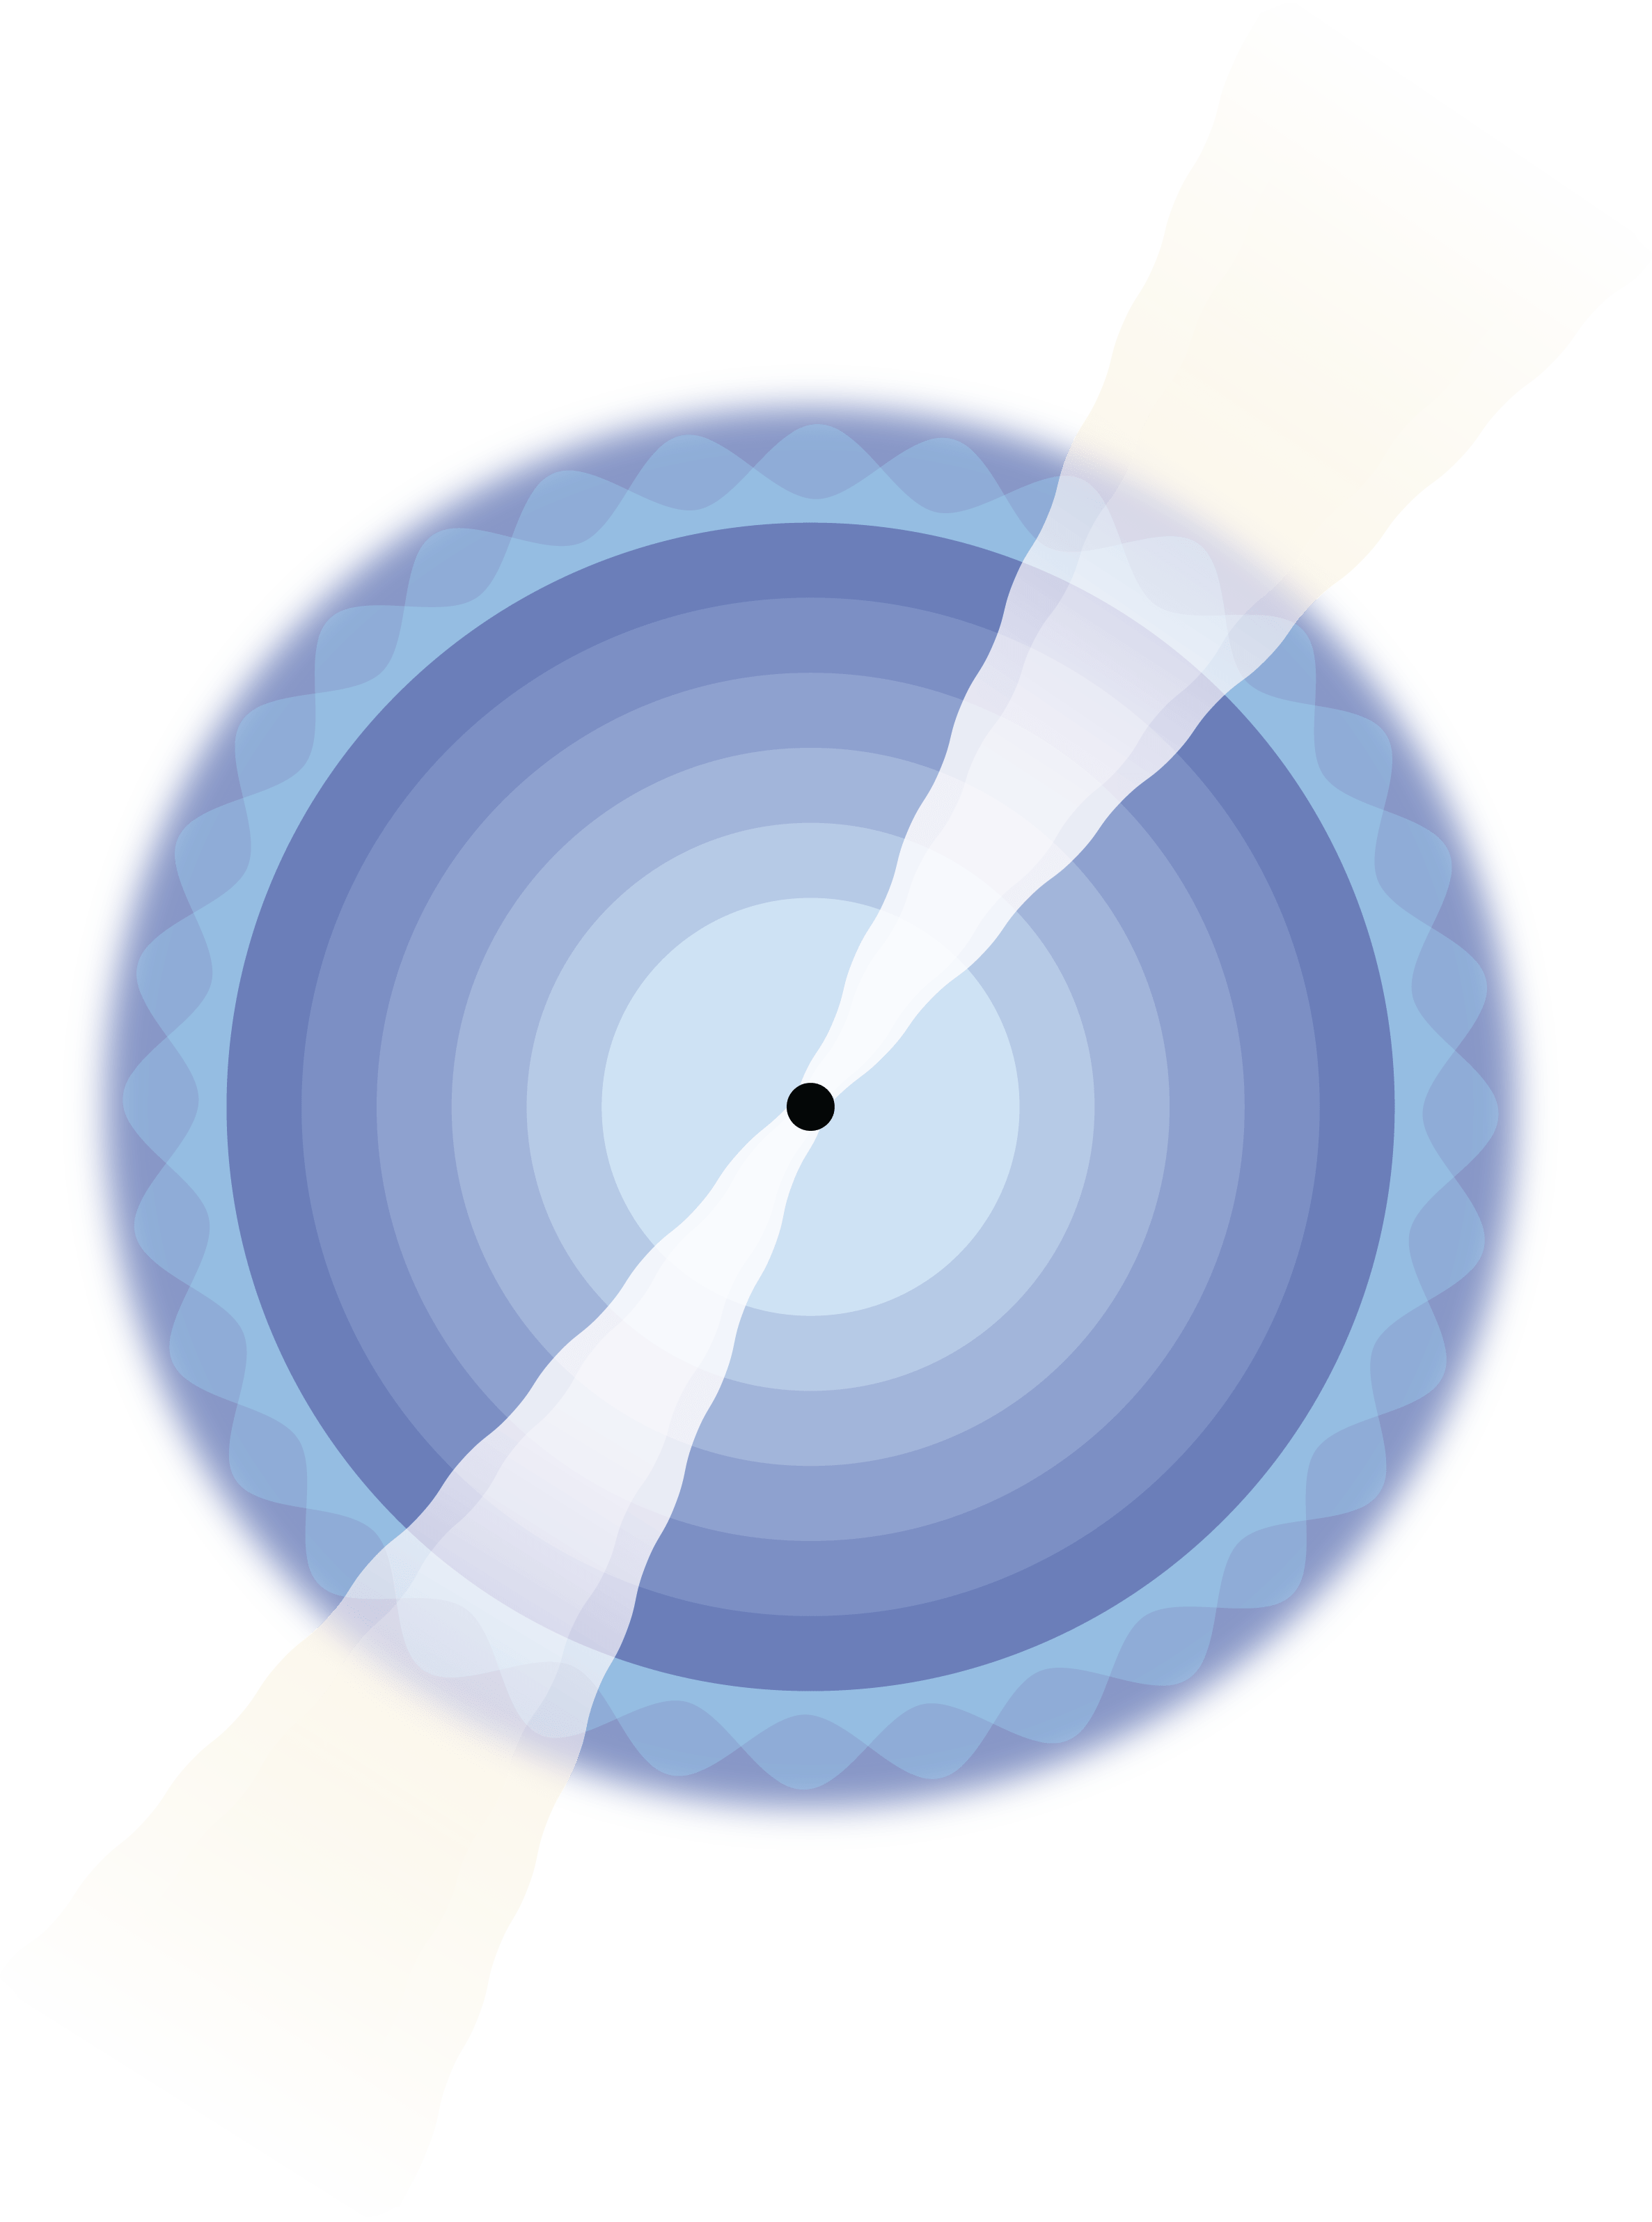 At the center of a series of nested blue circles is a black dot representing a black hole. A pair of cone-shaped, white jets emerge from either side of the black hole, tilted 45 degrees from vertical. The outermost blue circle has layered scalloped edges.